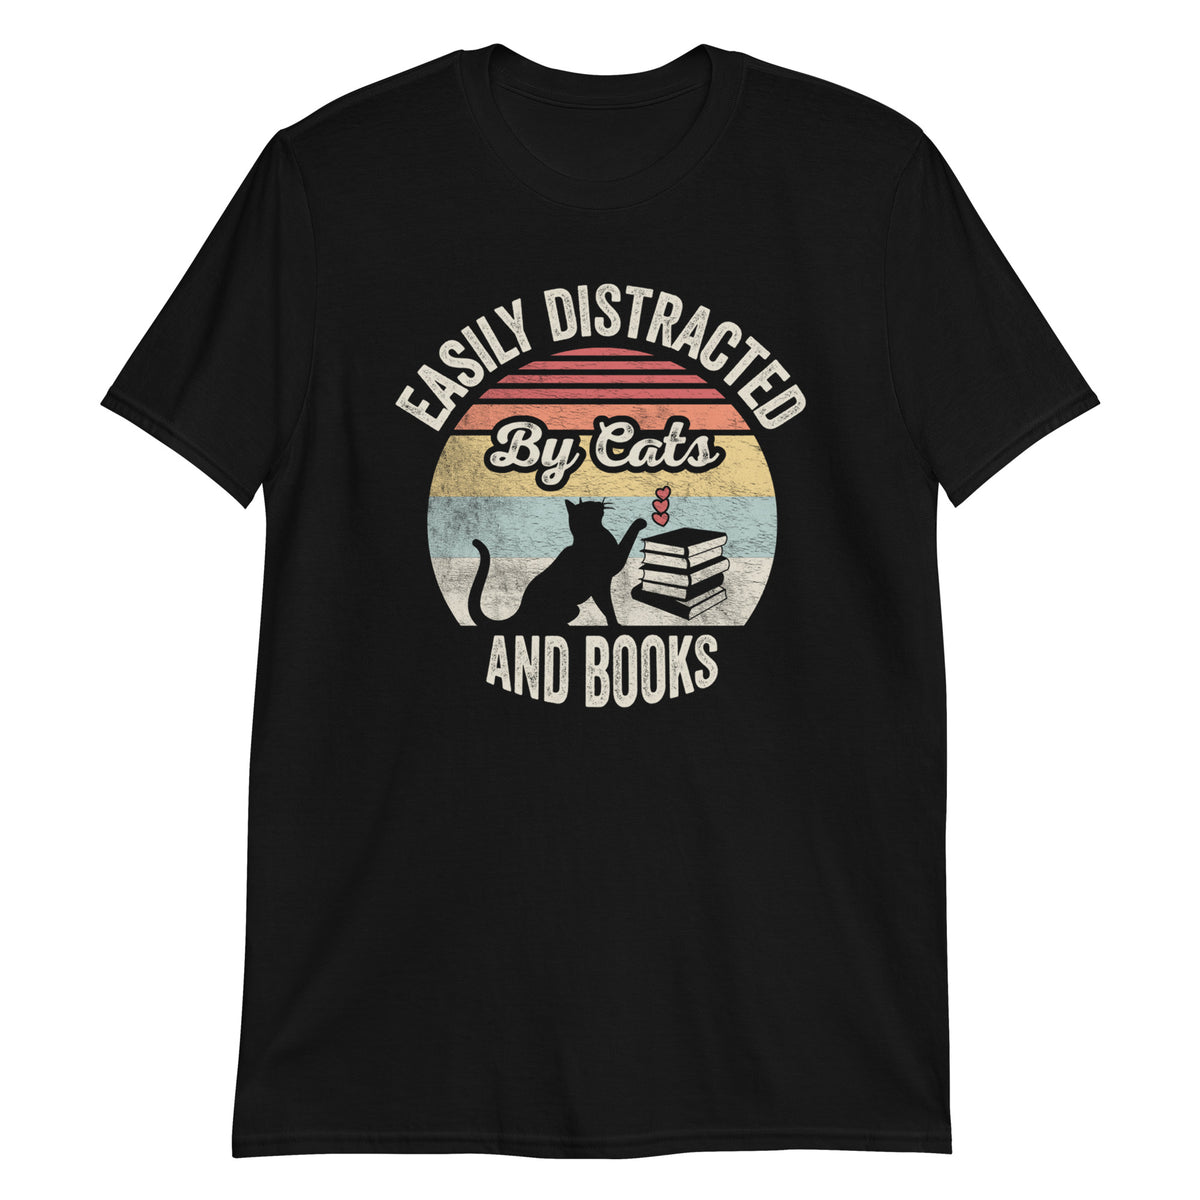 Easily Distracted By Cats & Books T-Shirt